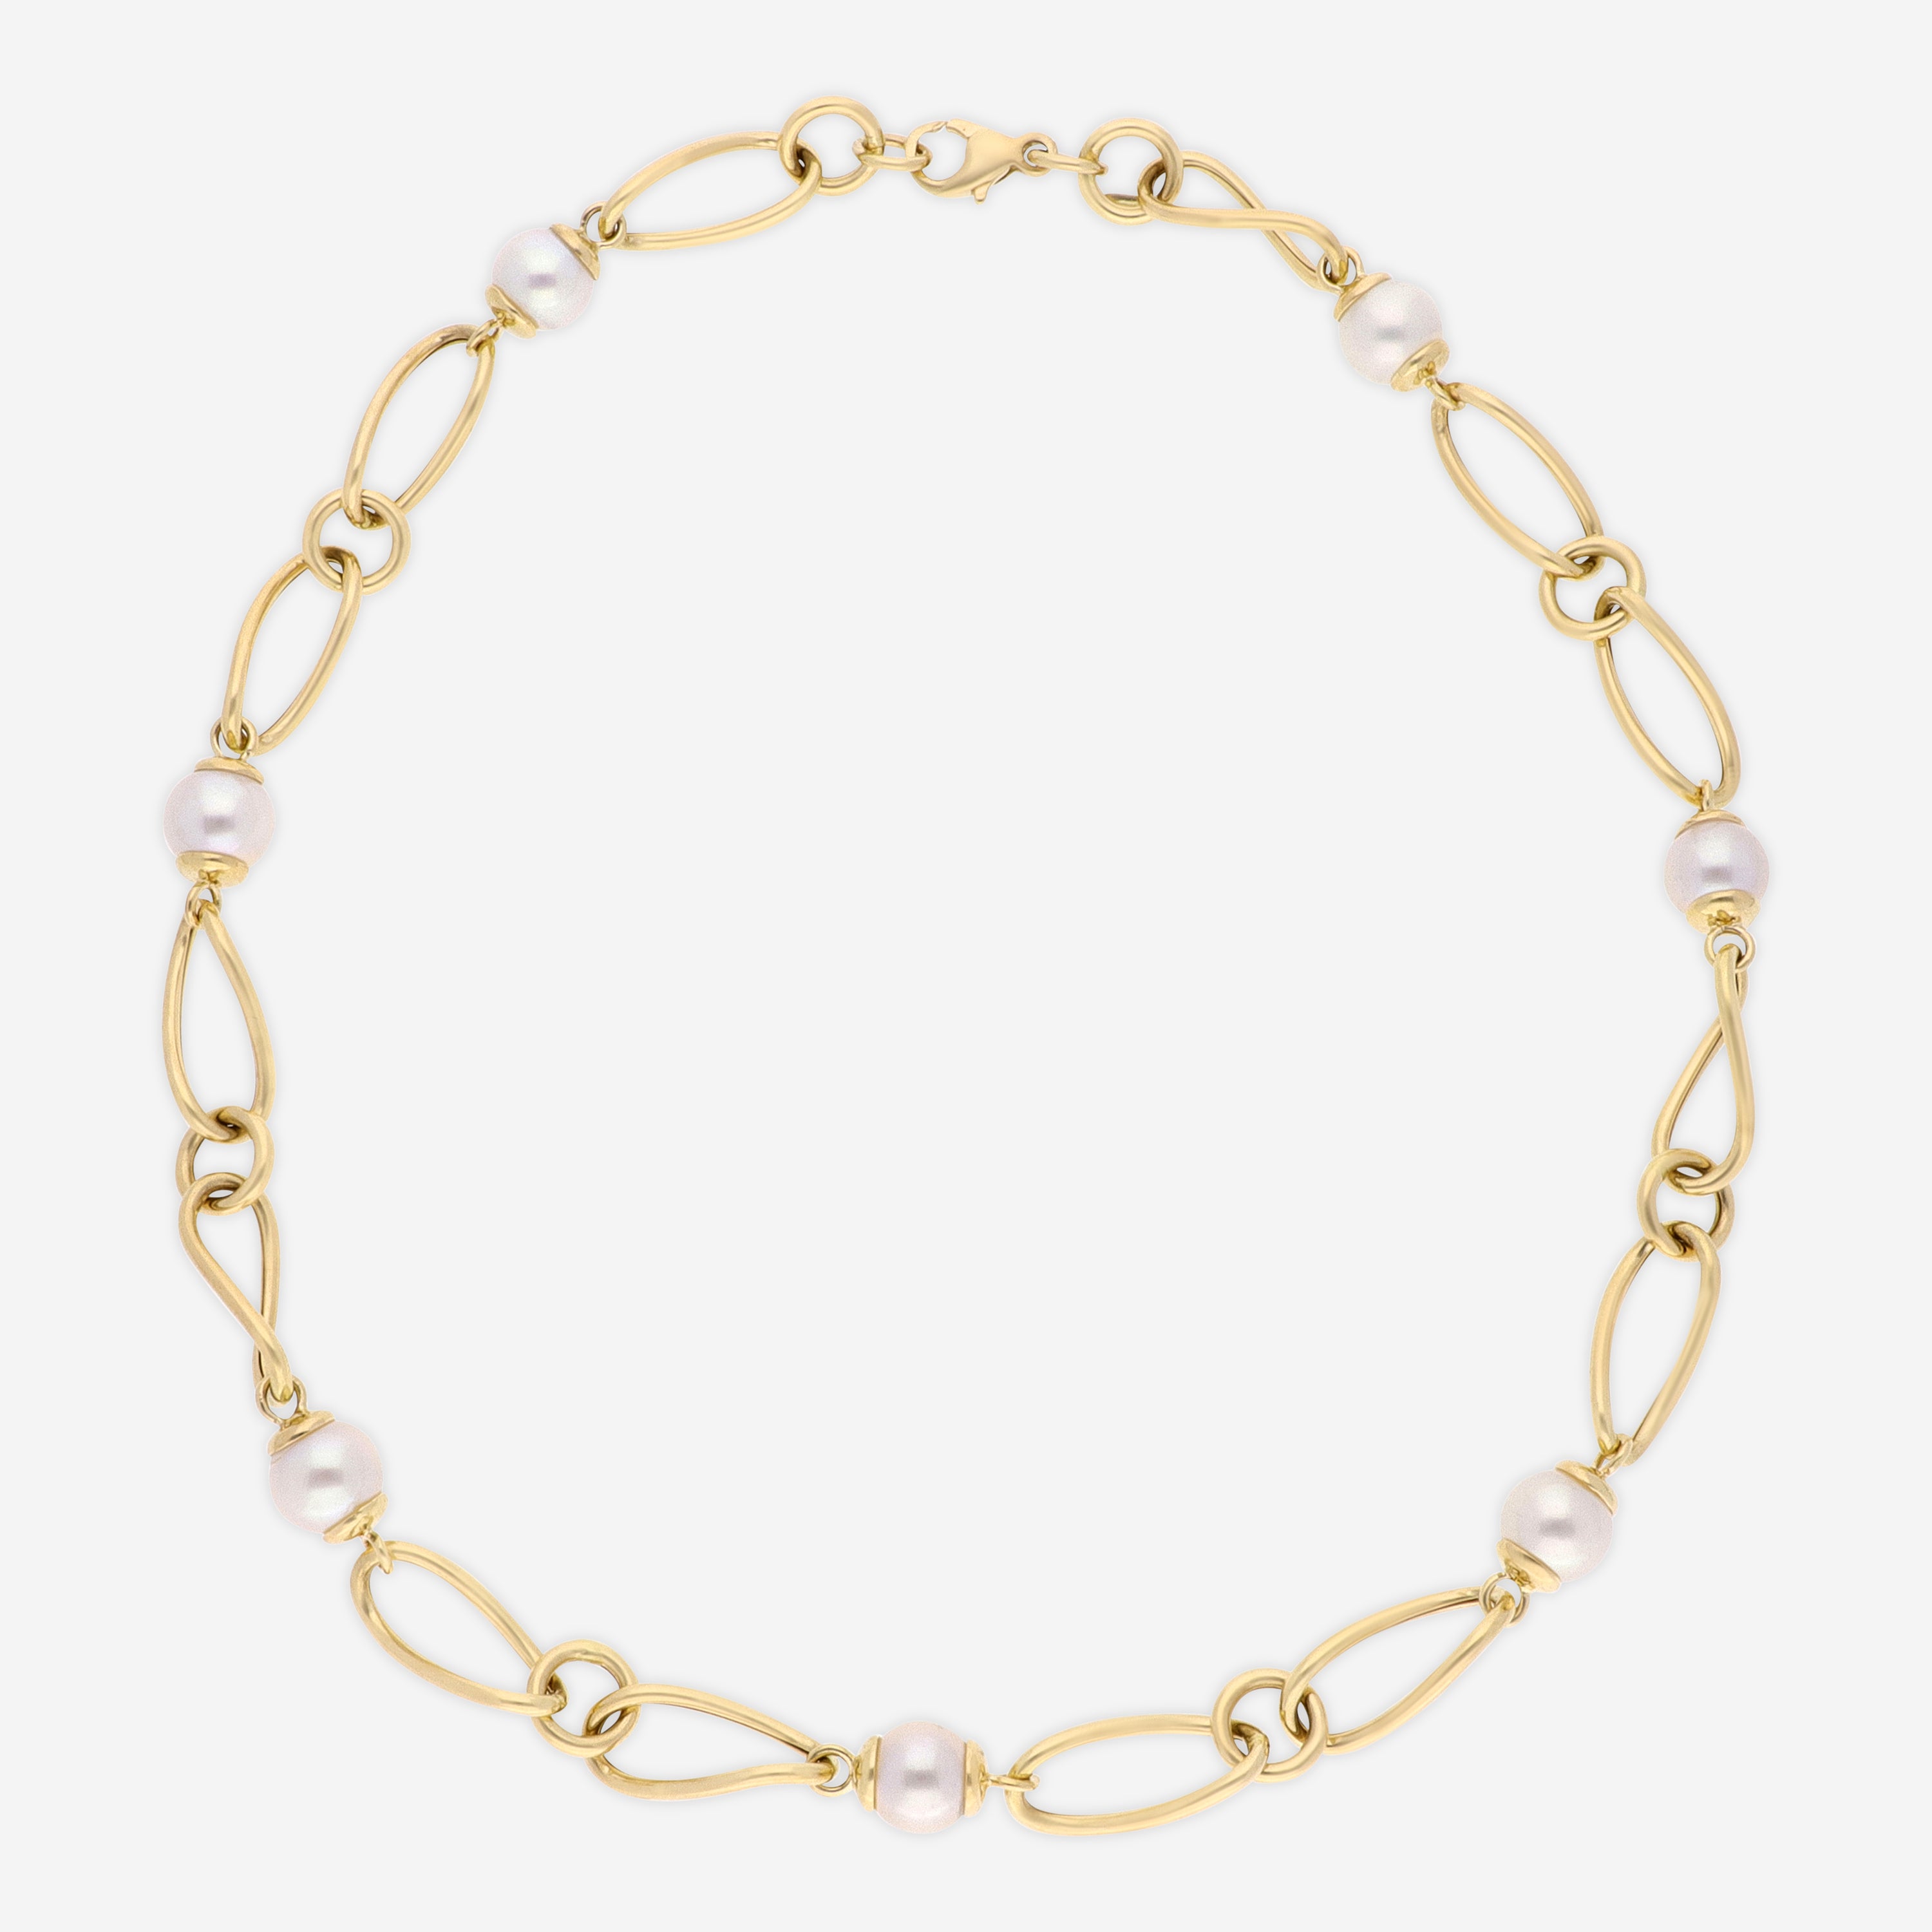 Ina Mar 14K Yellow Gold Fresh Water Pearls & Twist Oval Link Necklace N50626K4FWPY